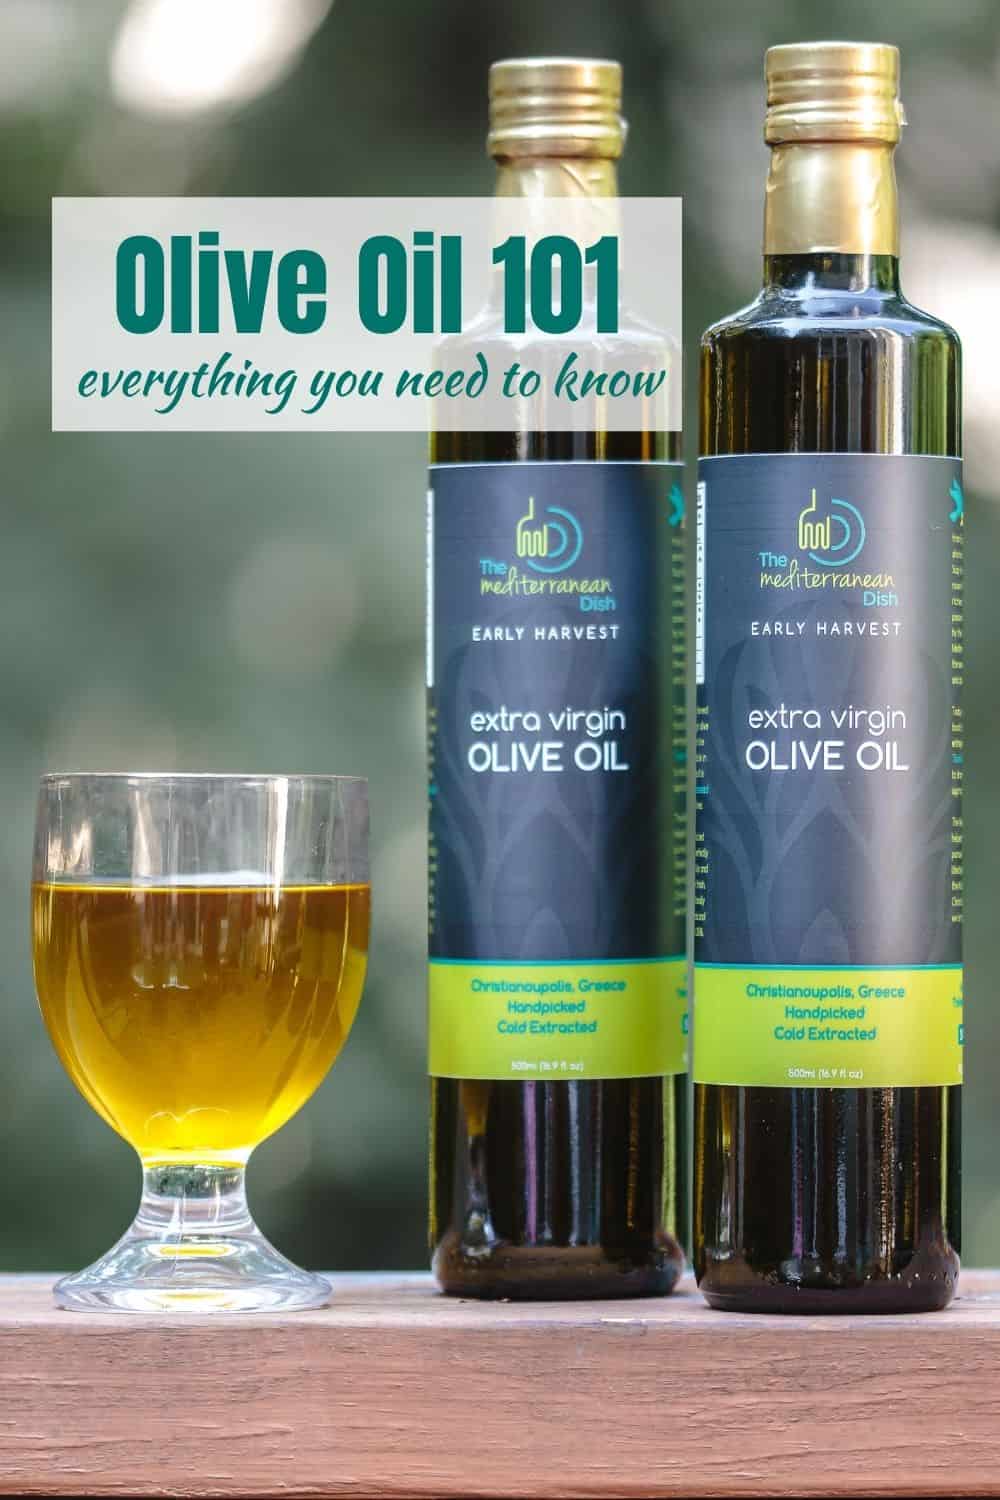 two bottles of olive oil next to a glass vessel containing olive oil